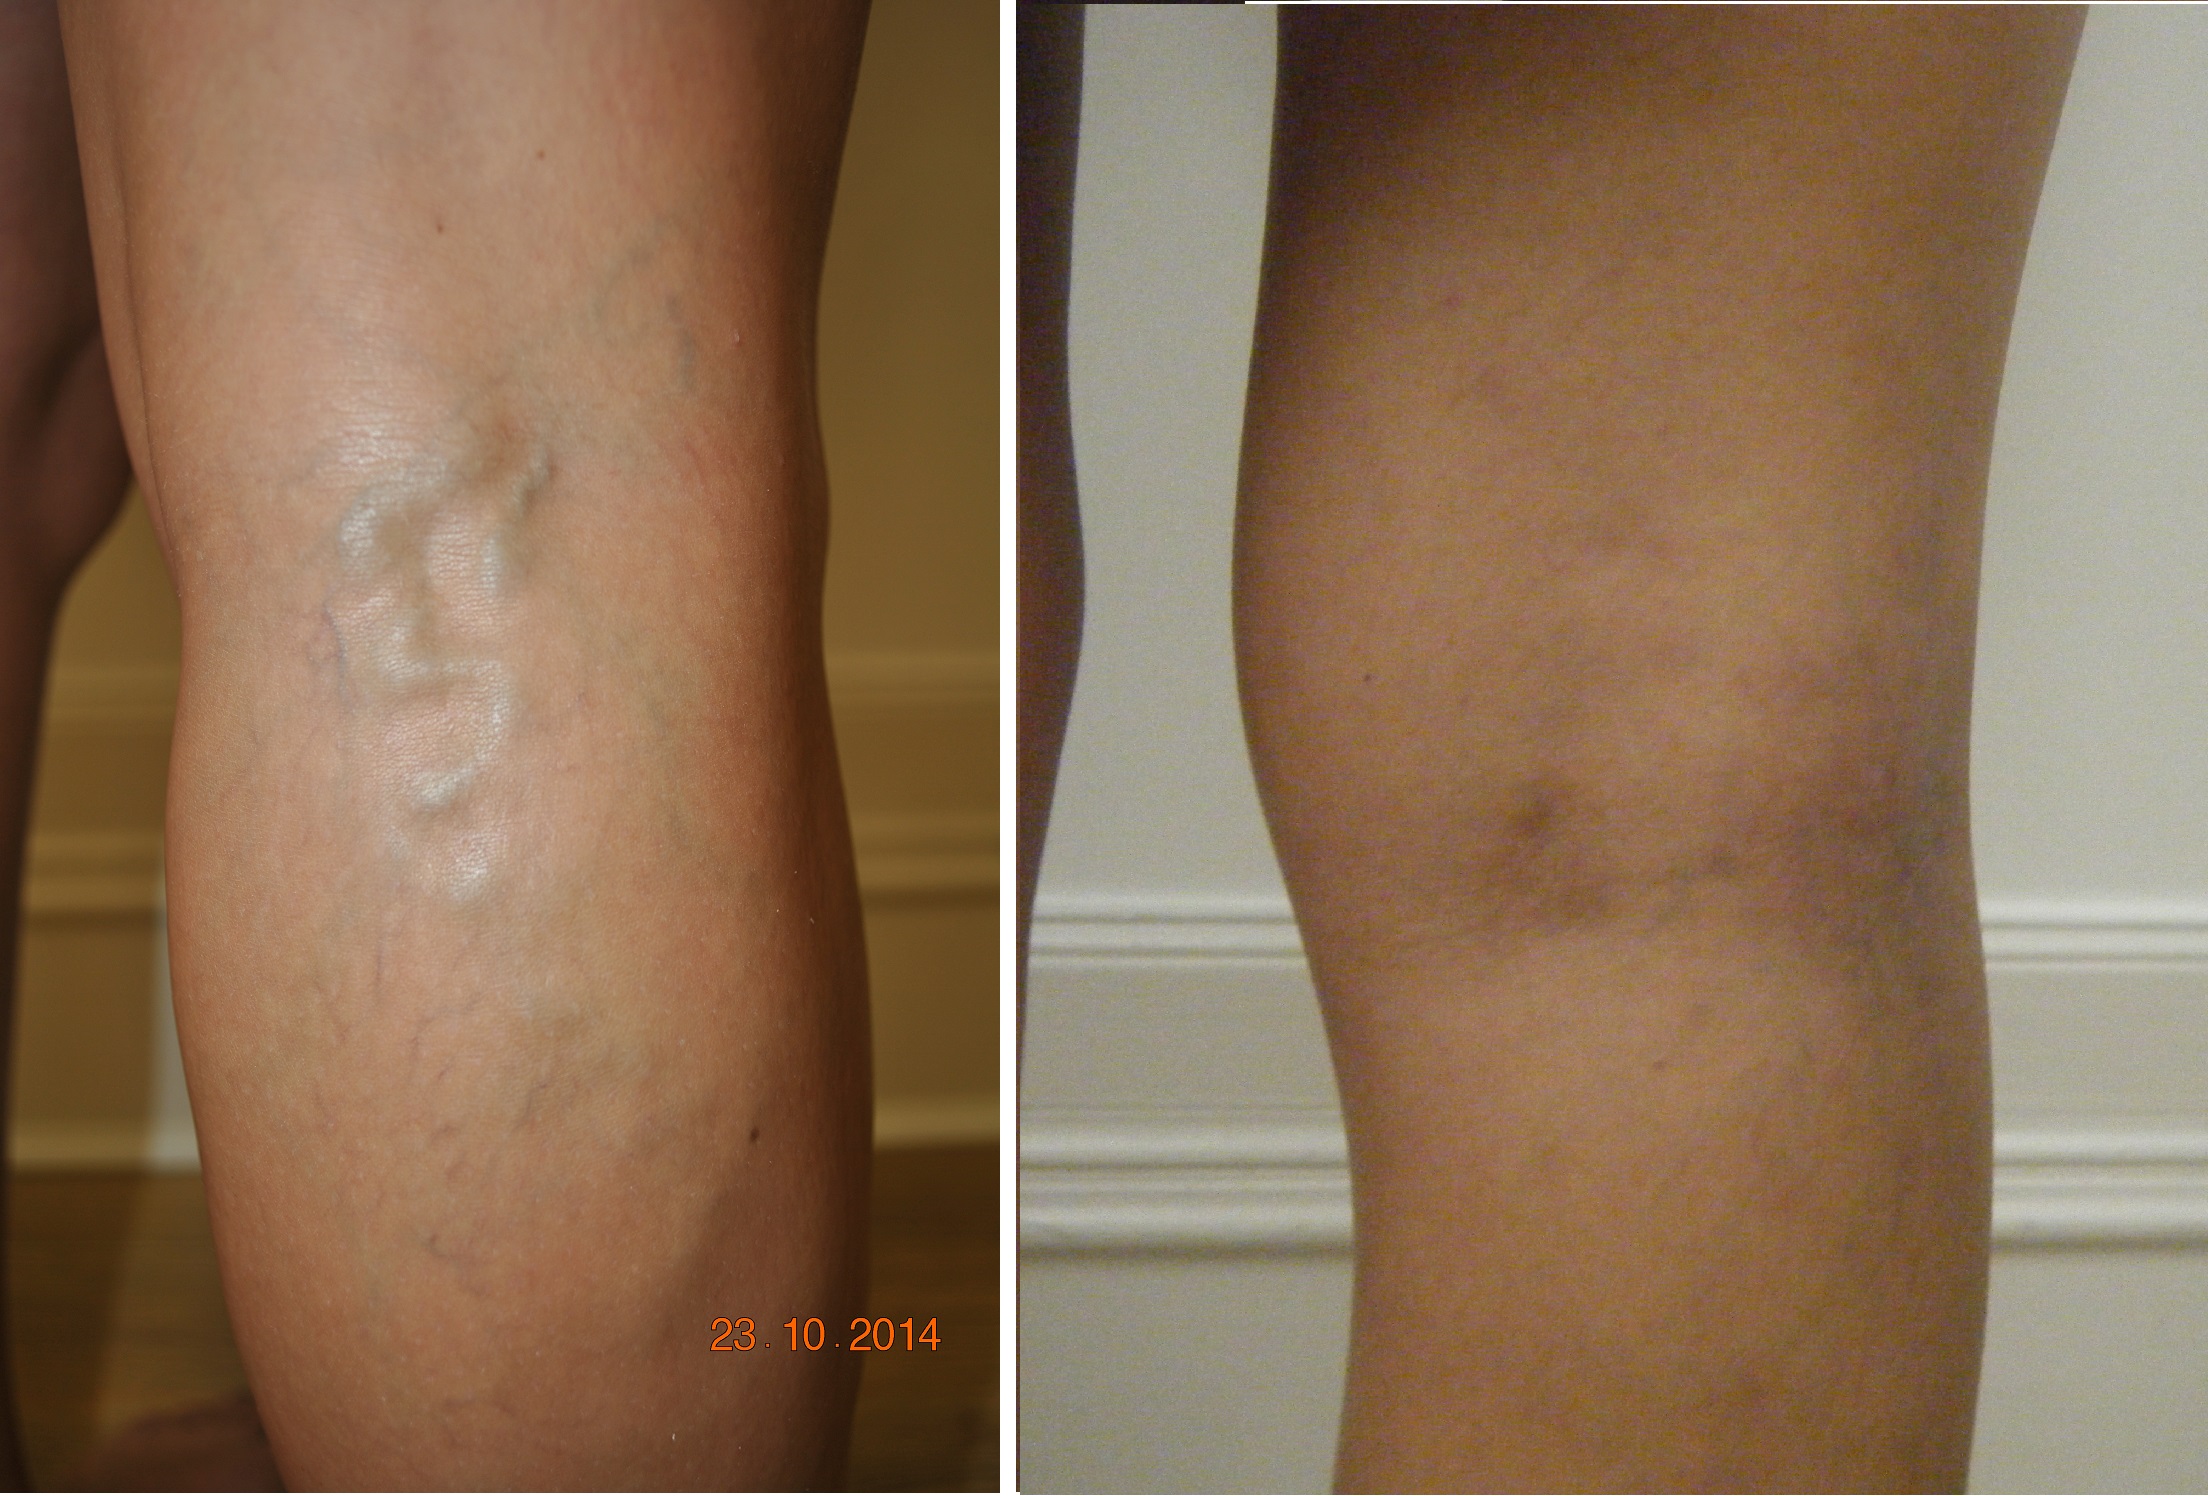 Sclerotherapy or Laser Treatment for Varicose Veins - Which is better